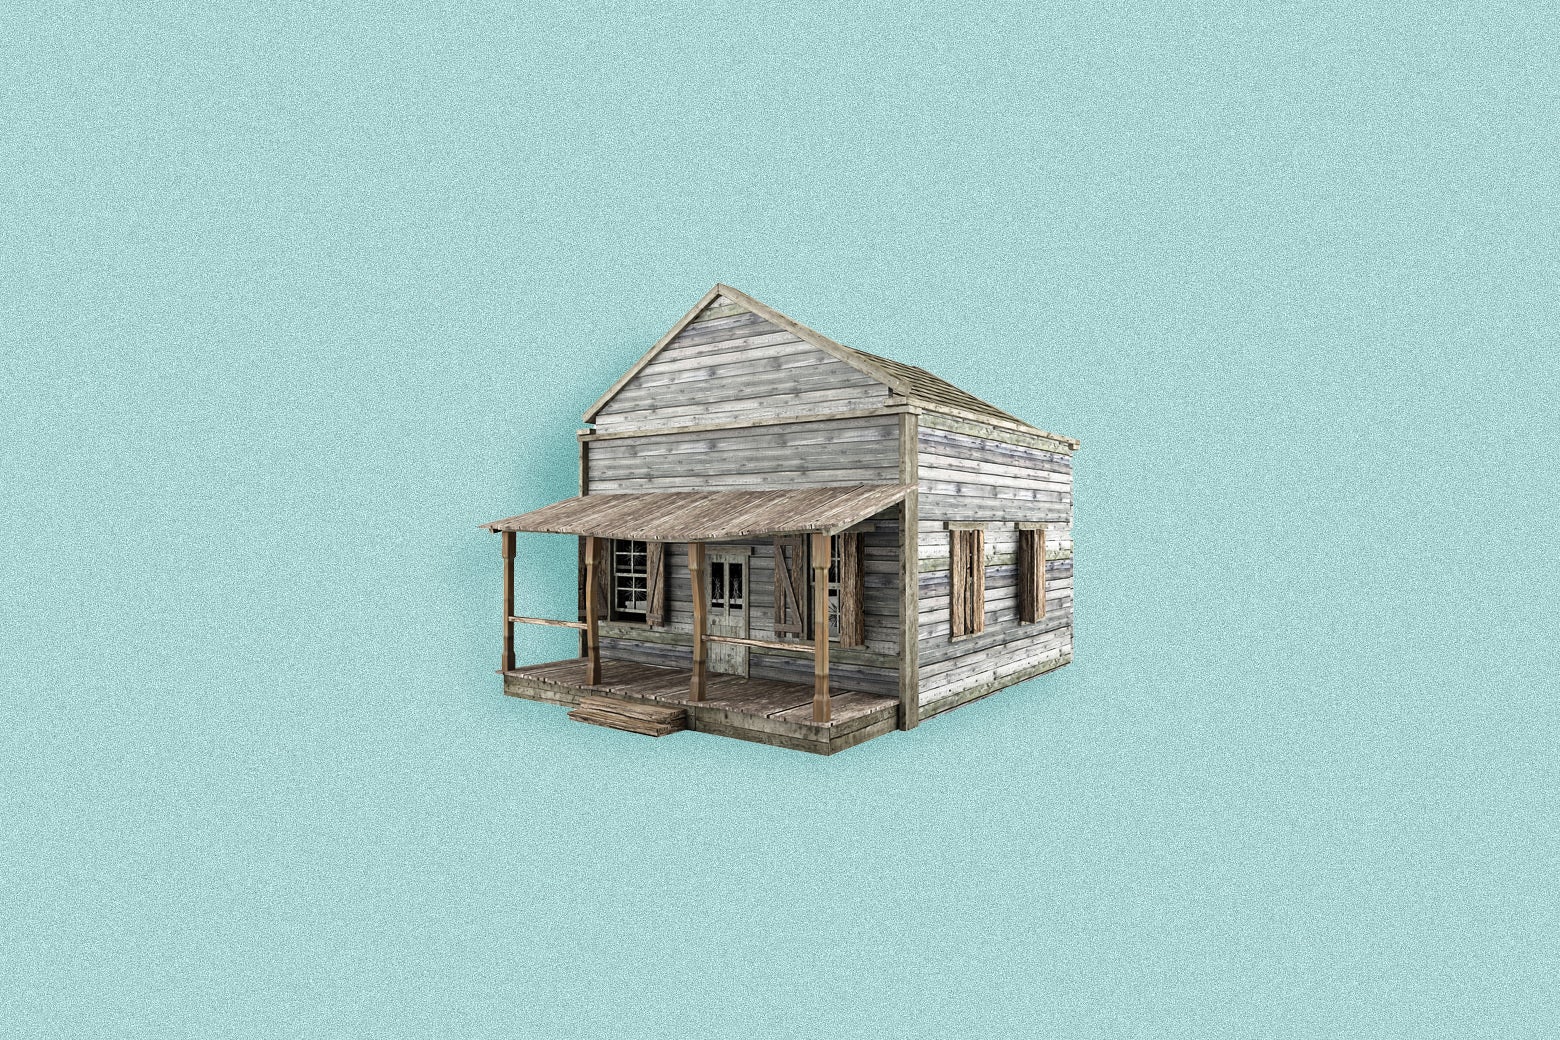 A historically accurate 18th-century 10-by-10 cabin against a blue background.